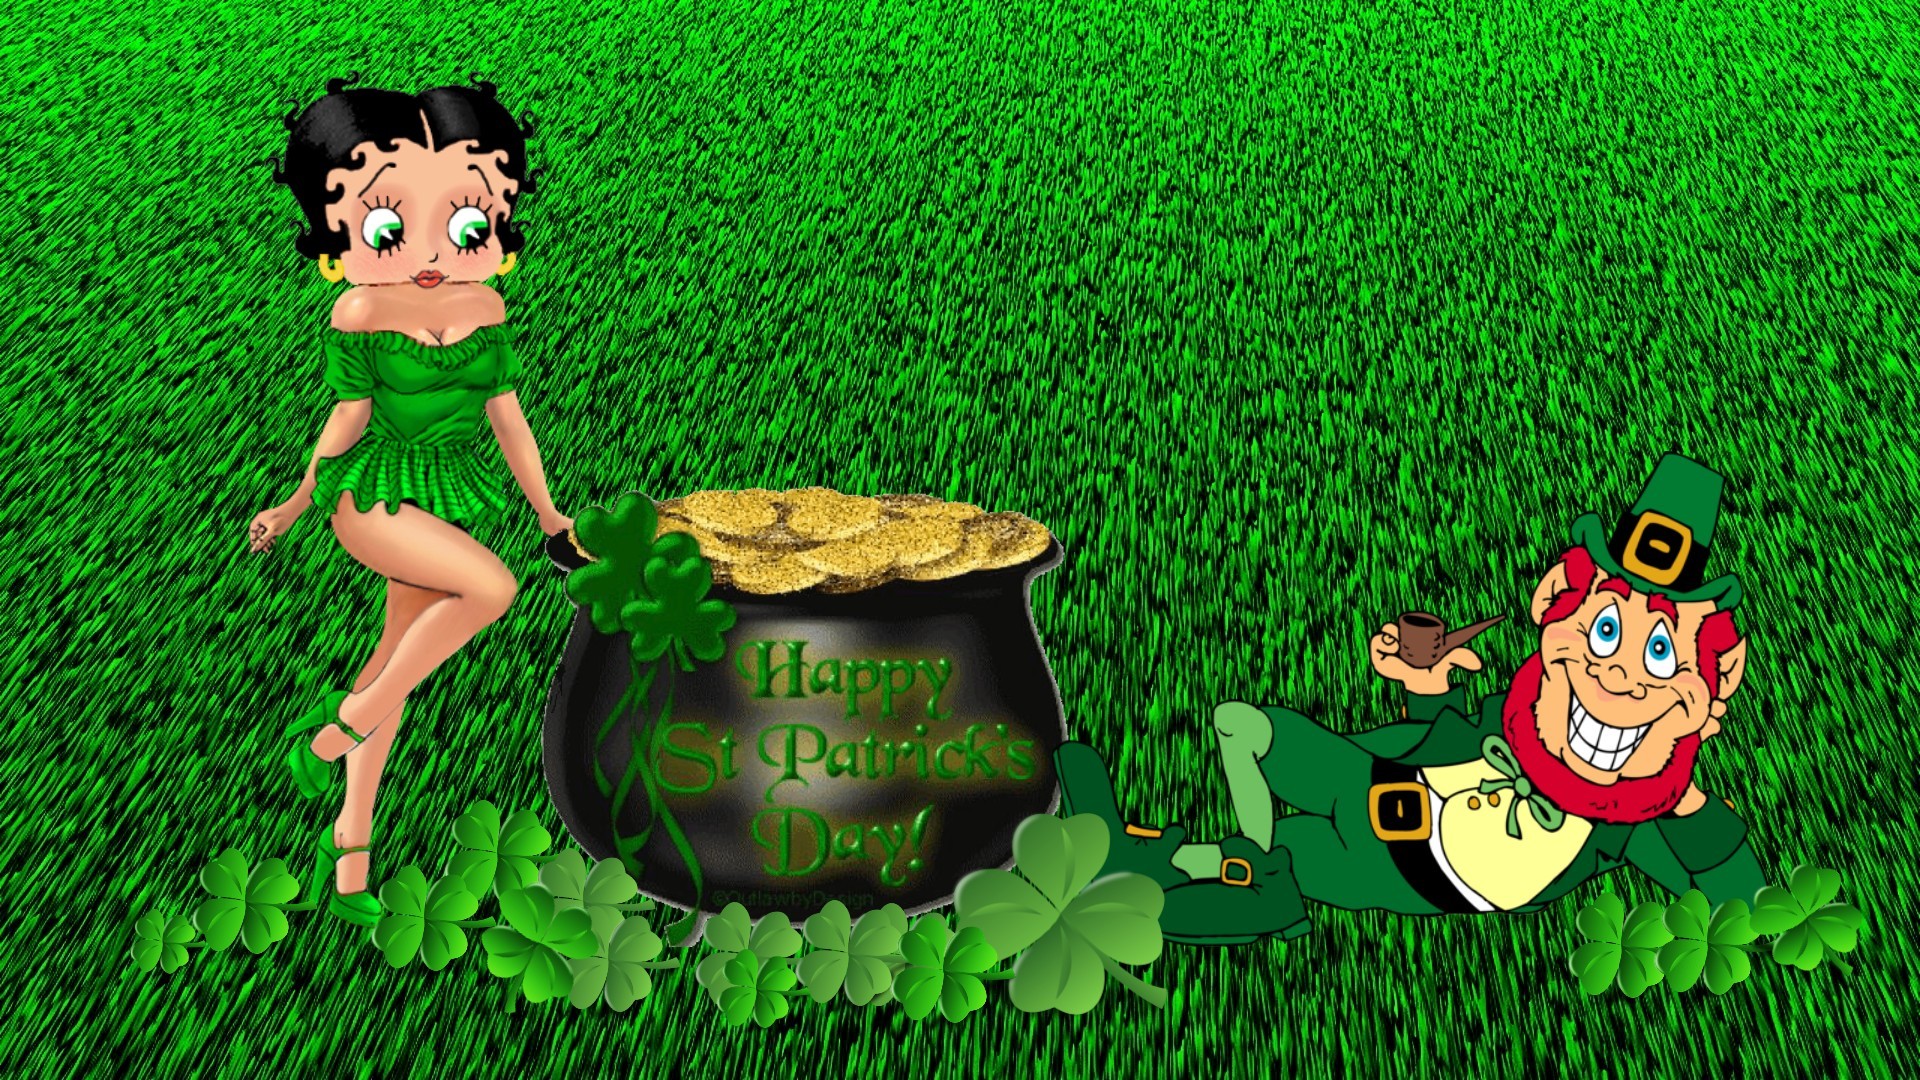 Hot Wallpapers For St. Patrick's Day